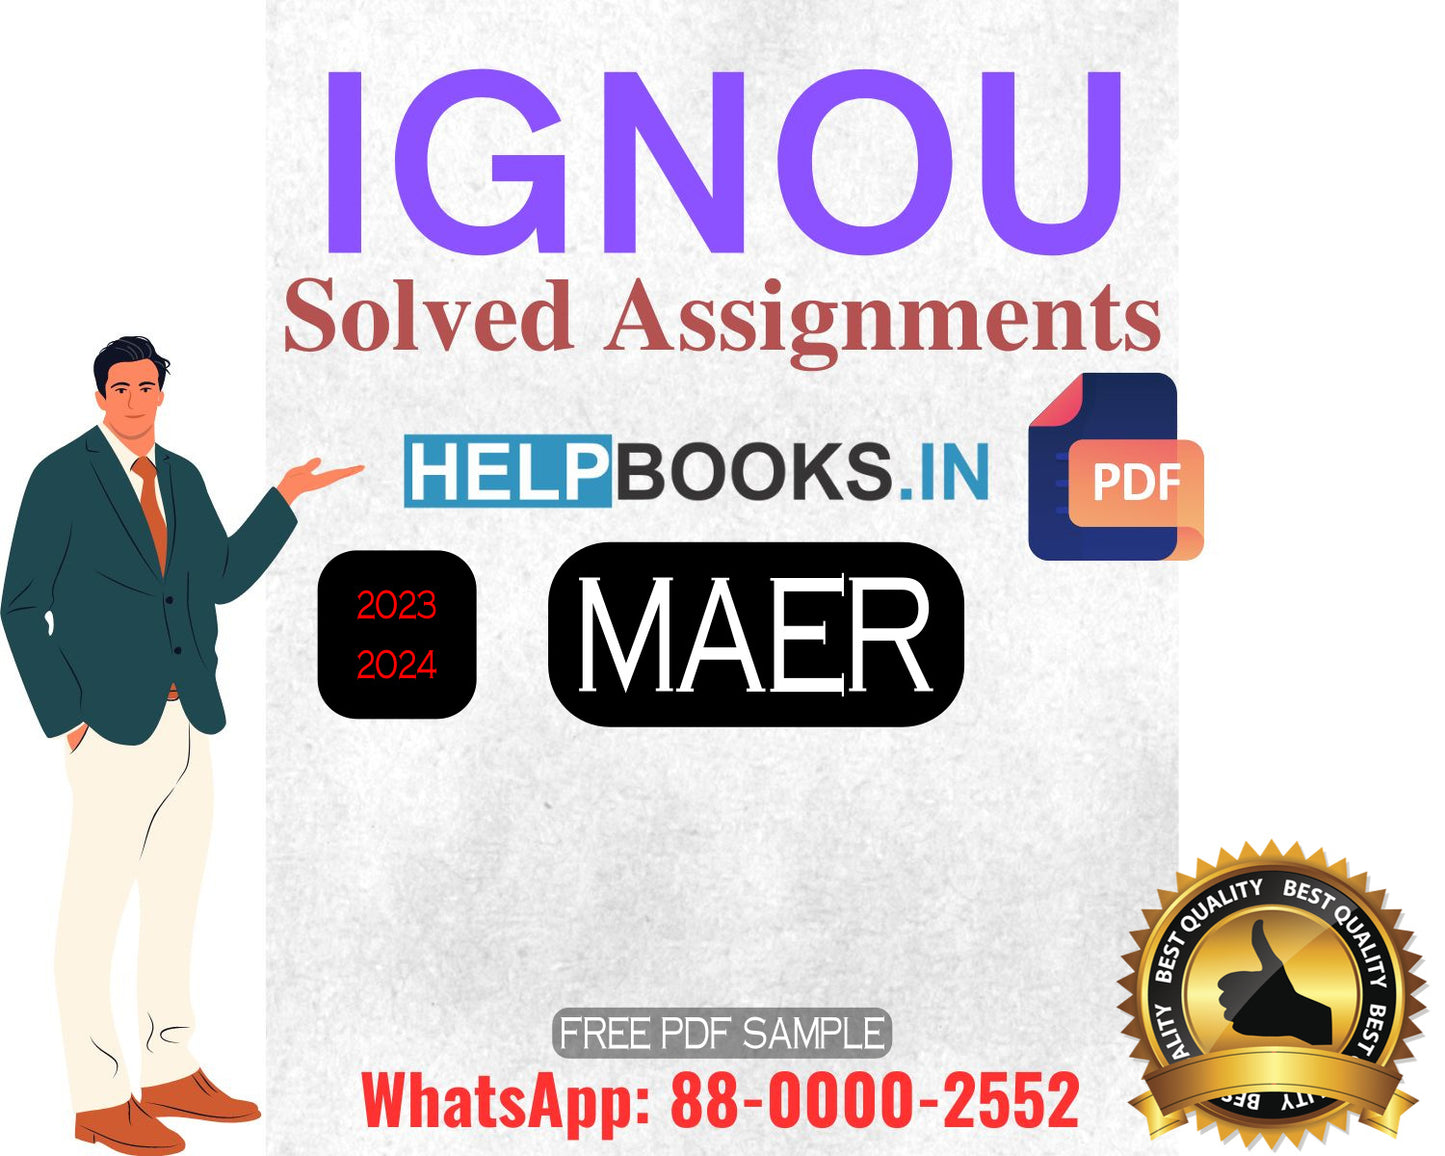 IGNOU Master's Degree Programme Latest IGNOU Solved Assignment 2023-24 & 2022-23 Sessions : MAER MASTER OF ARTS ENTREPRENEURSHIP Solved Assignments